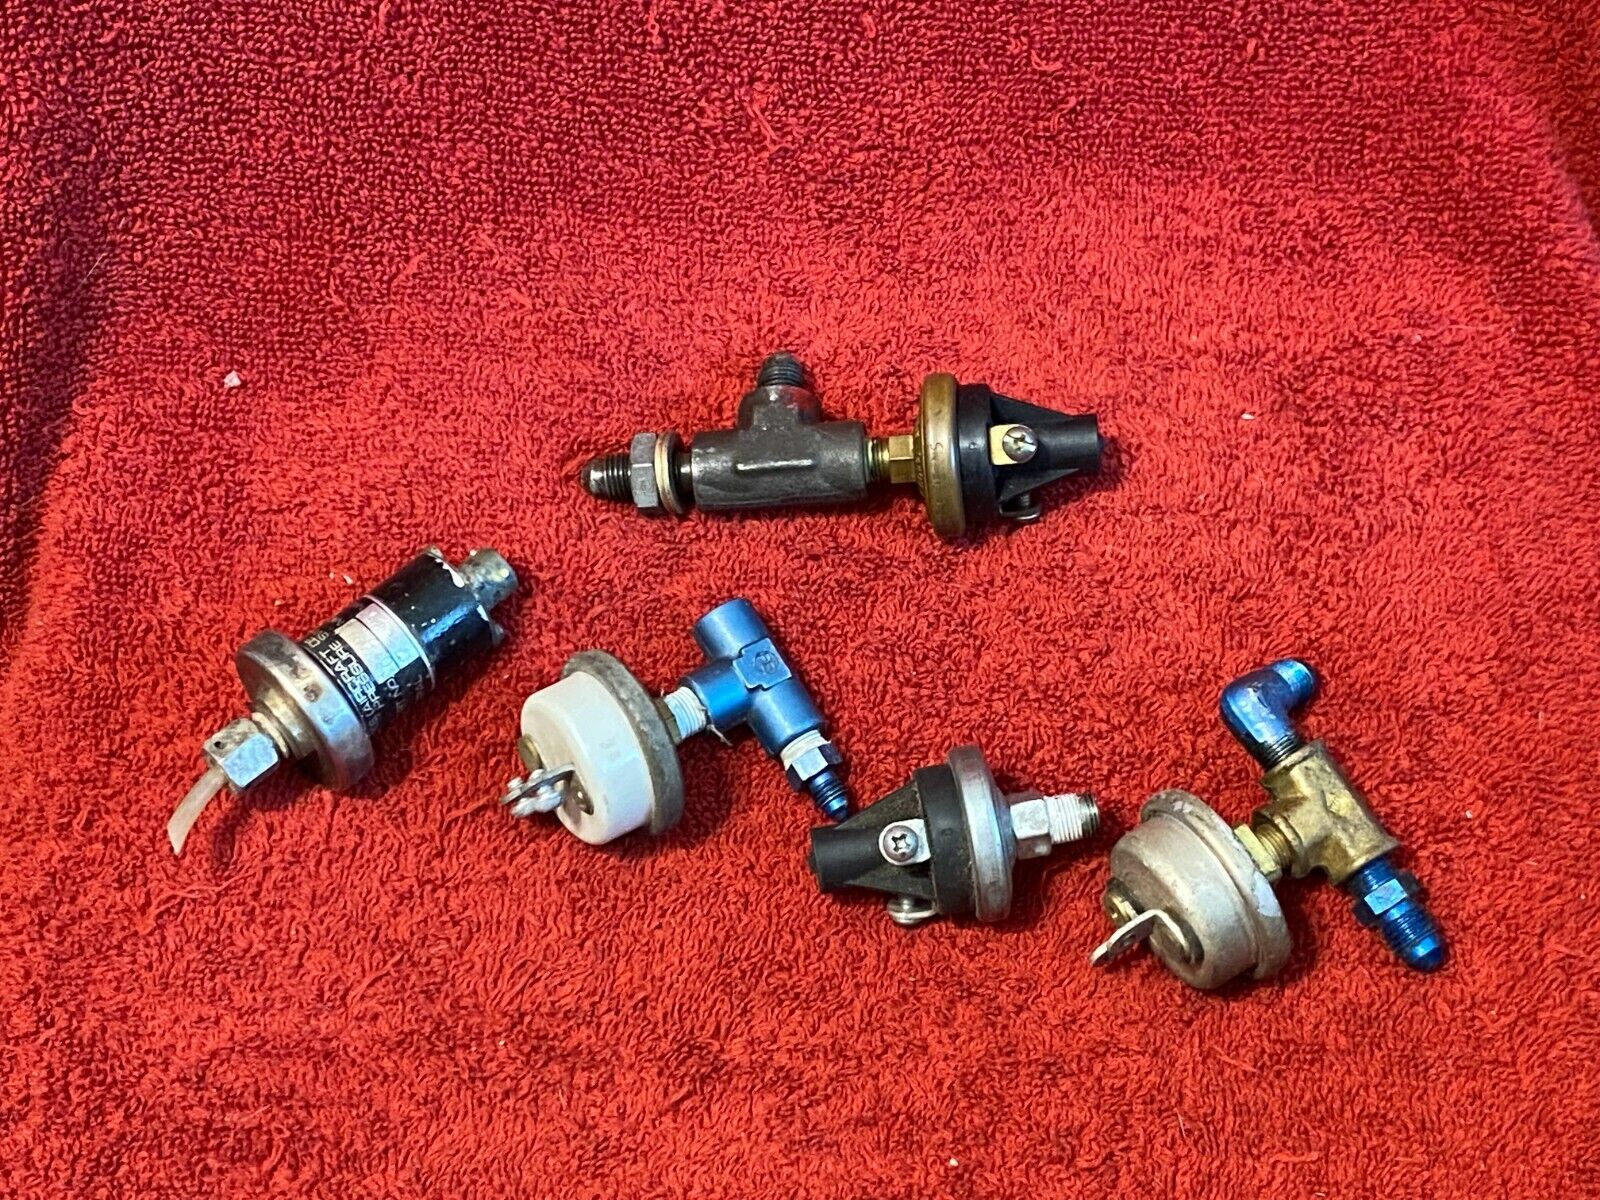 LOT OF 5 AIRCRAFT PRESSURE SWITCHES HOBBS TKS 